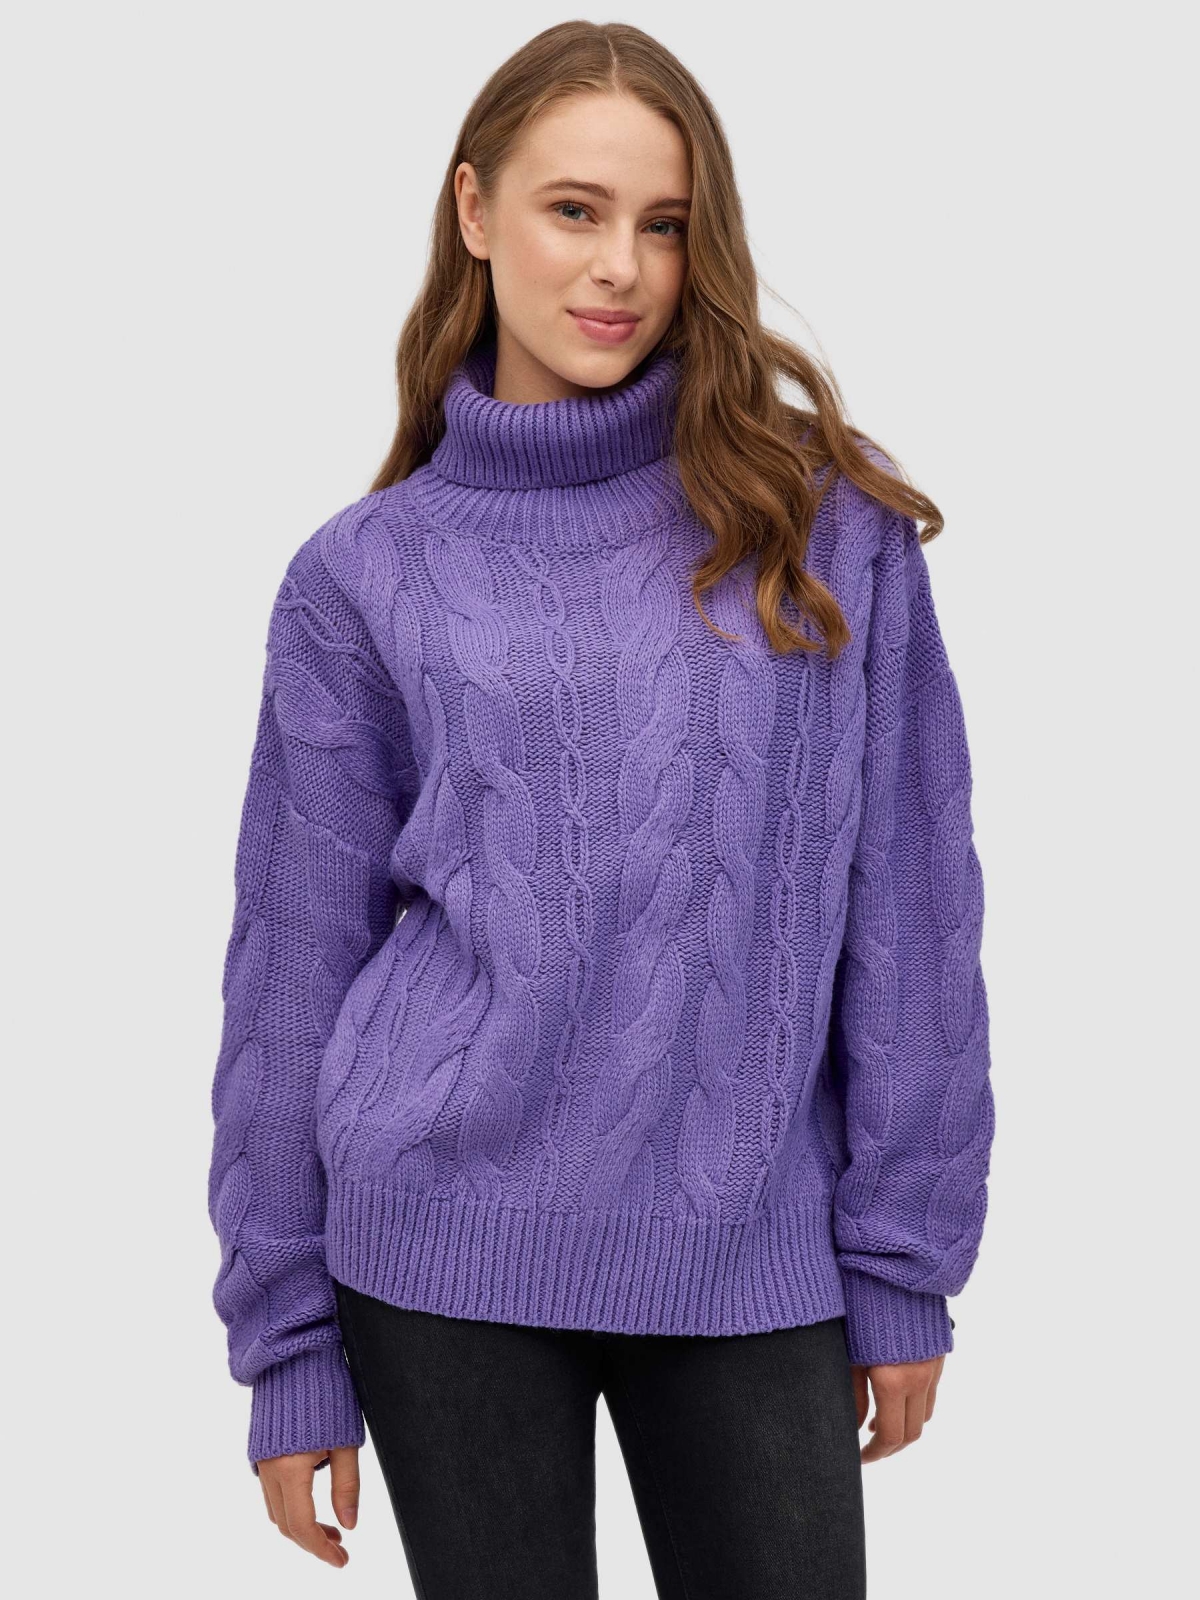 Sweater turn-down collar eights lilac middle front view